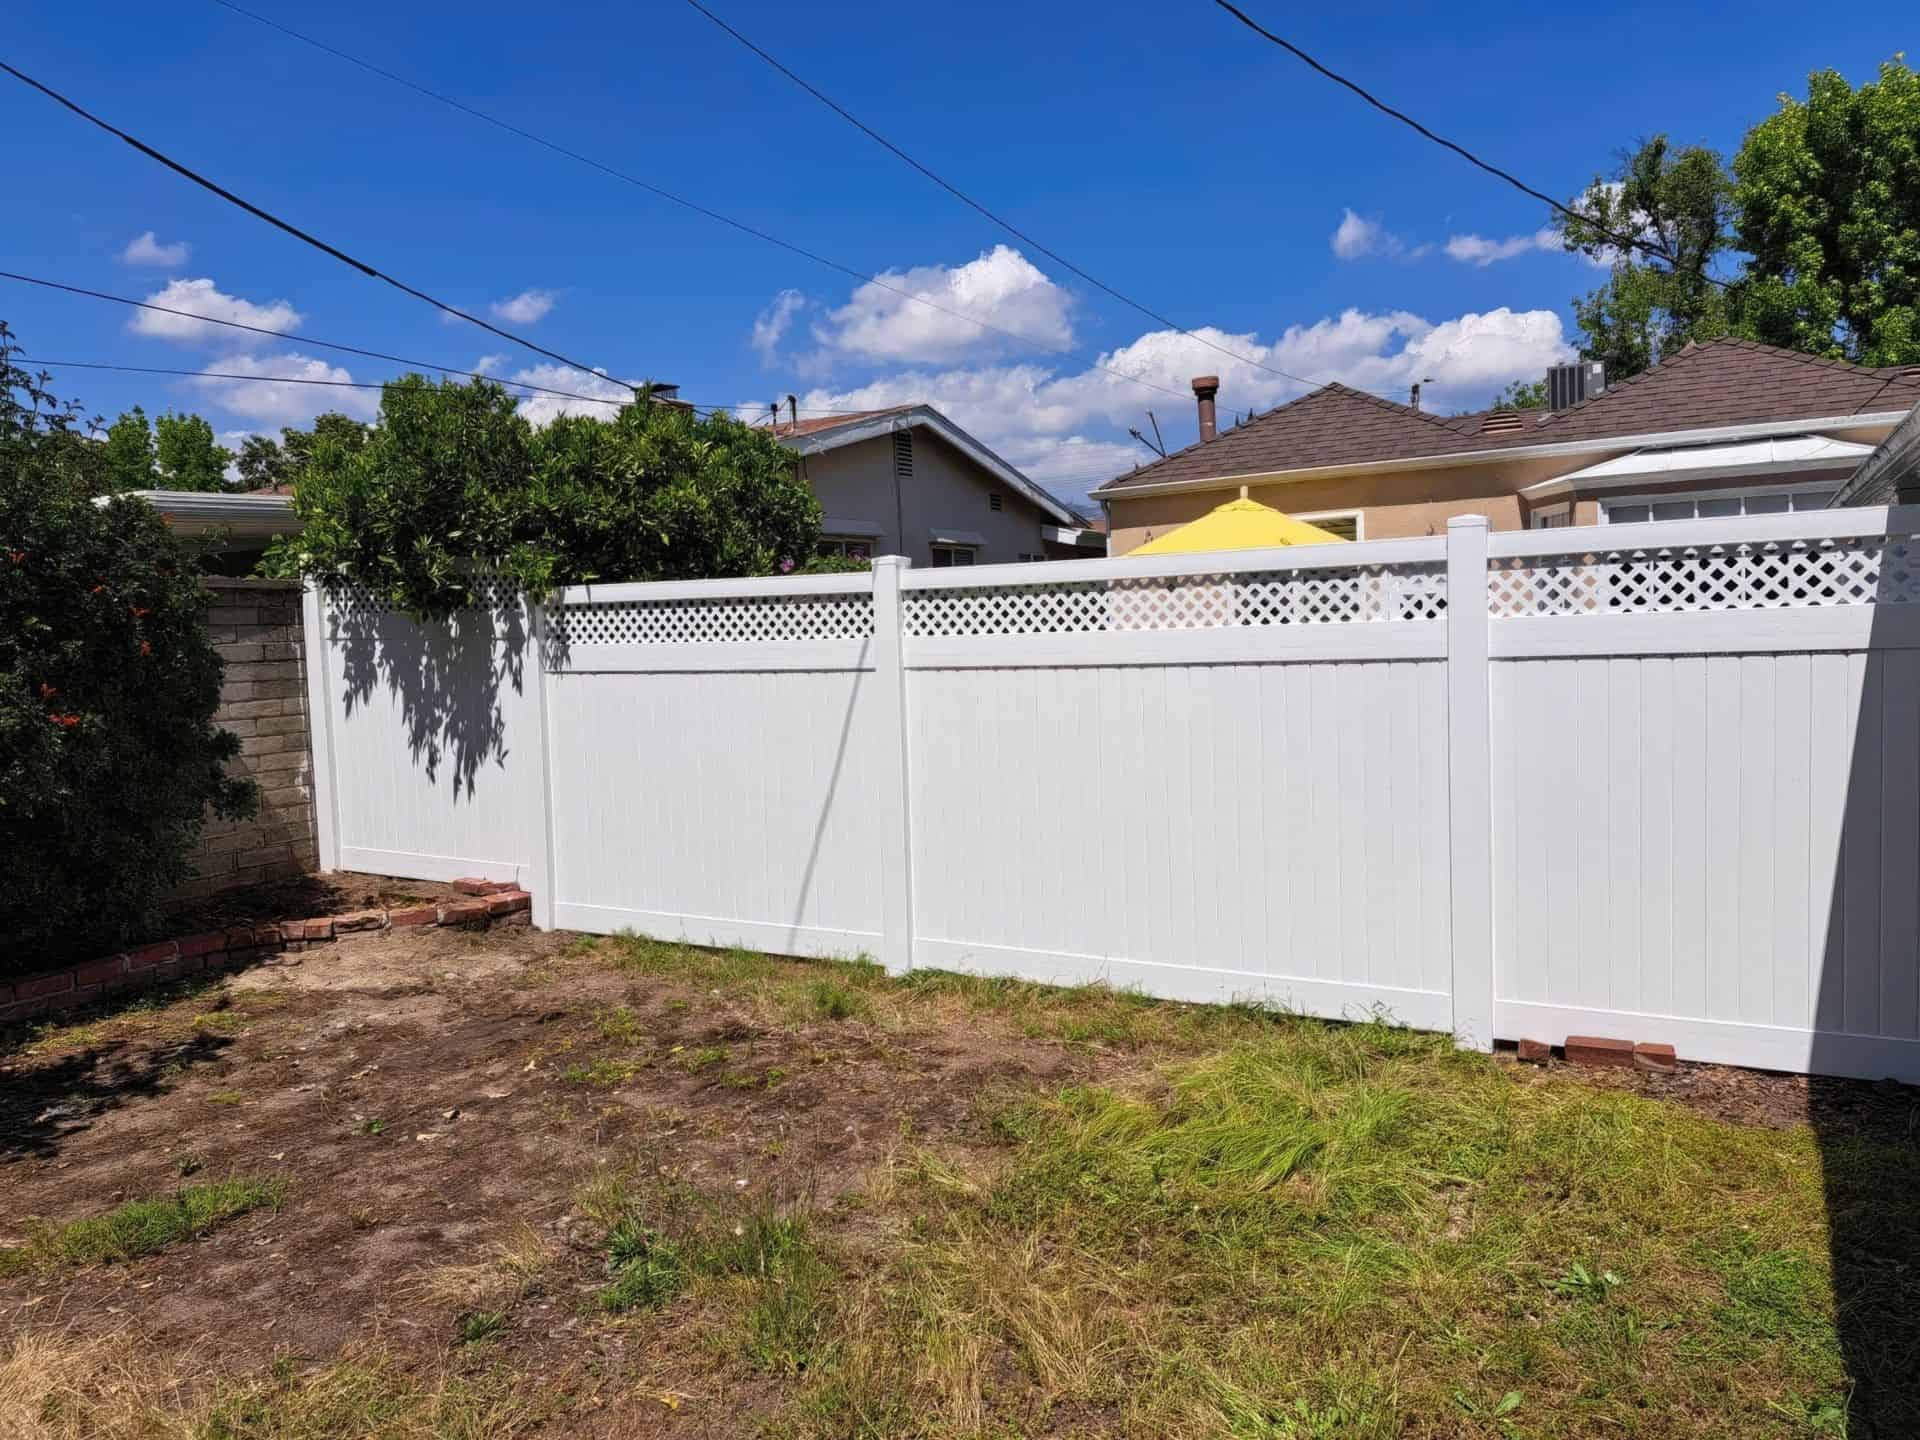 Vinyl privacy and lattice fence connected to gate leading into concrete walkway beside grassy front lawn leading into porch.